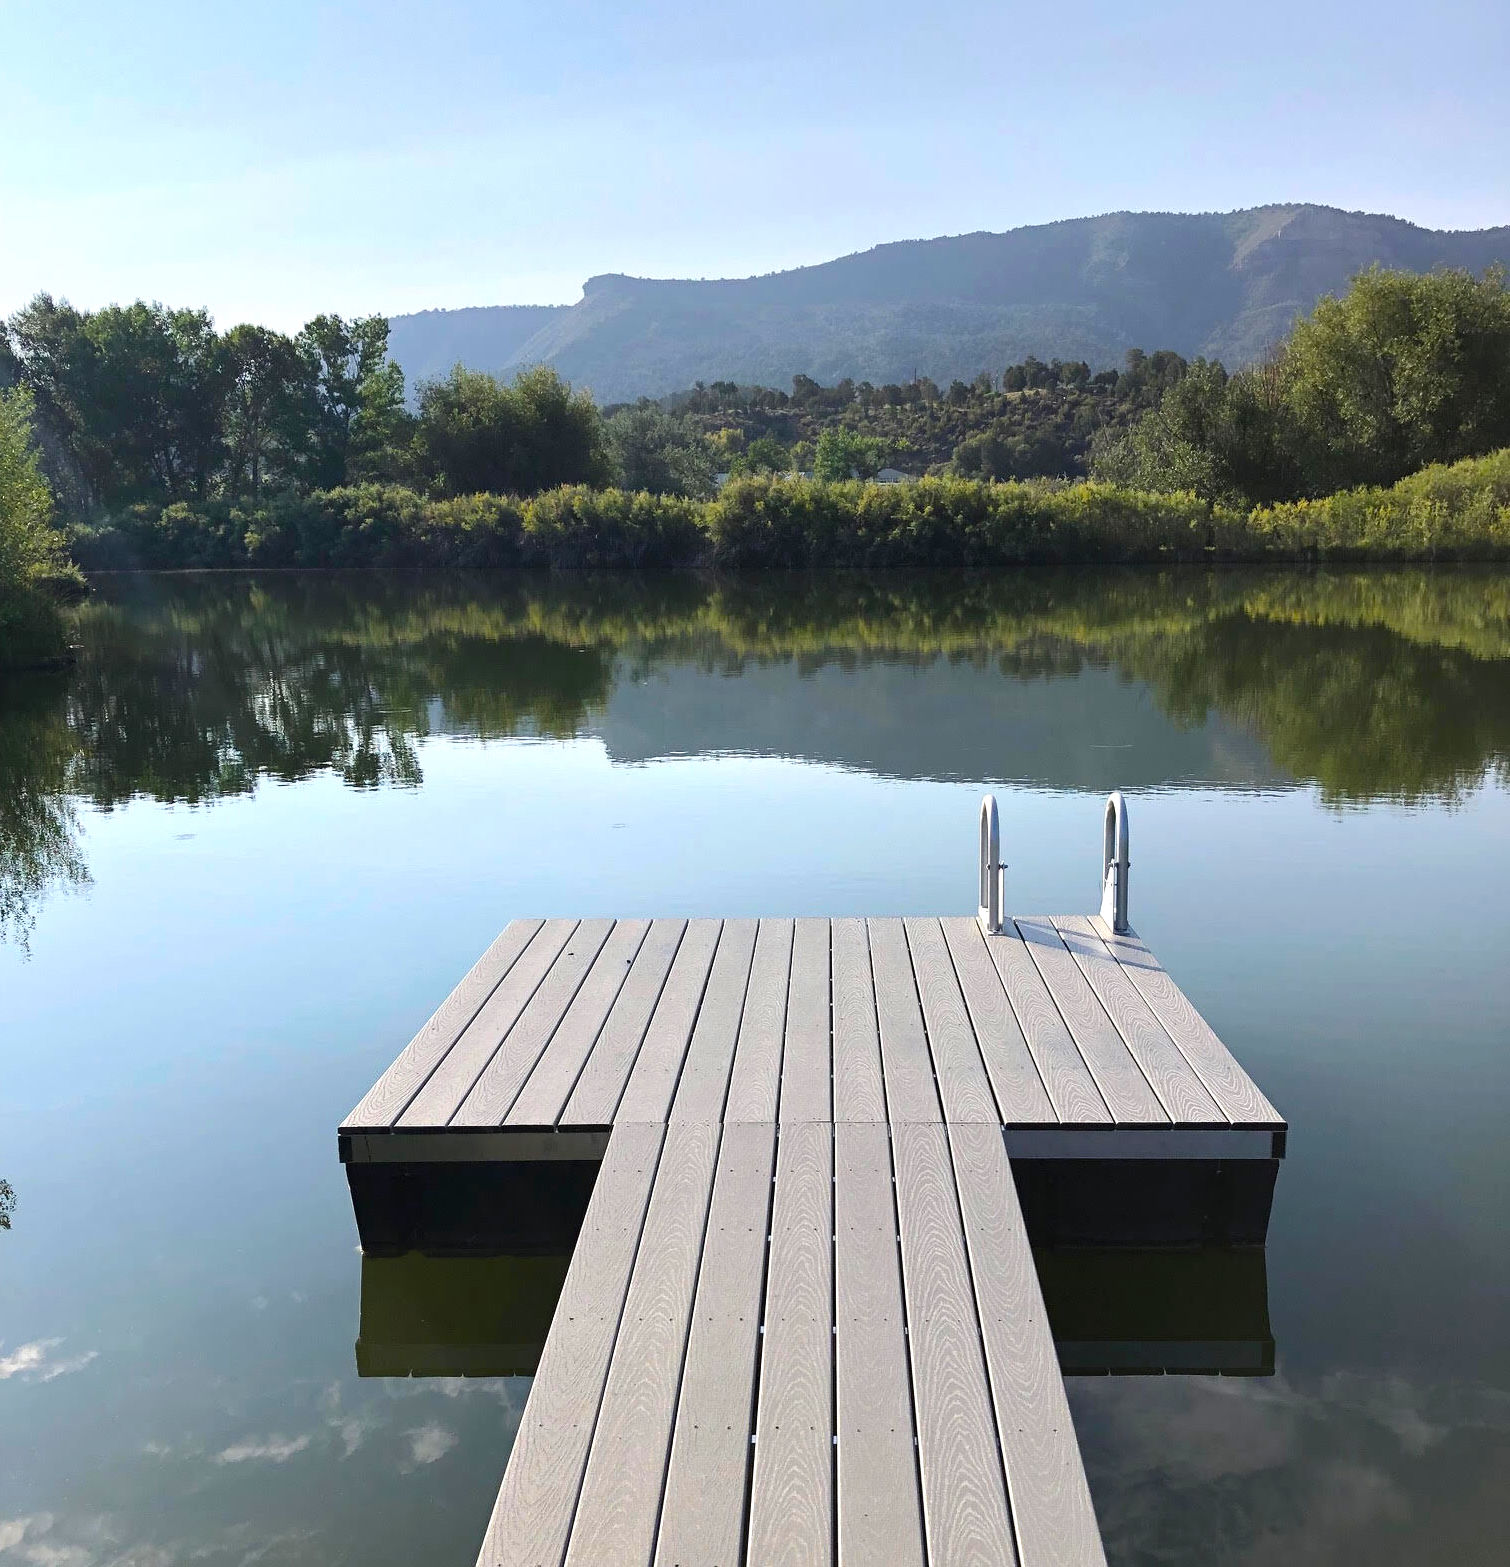 Aluminum dock in pond with mountains in background